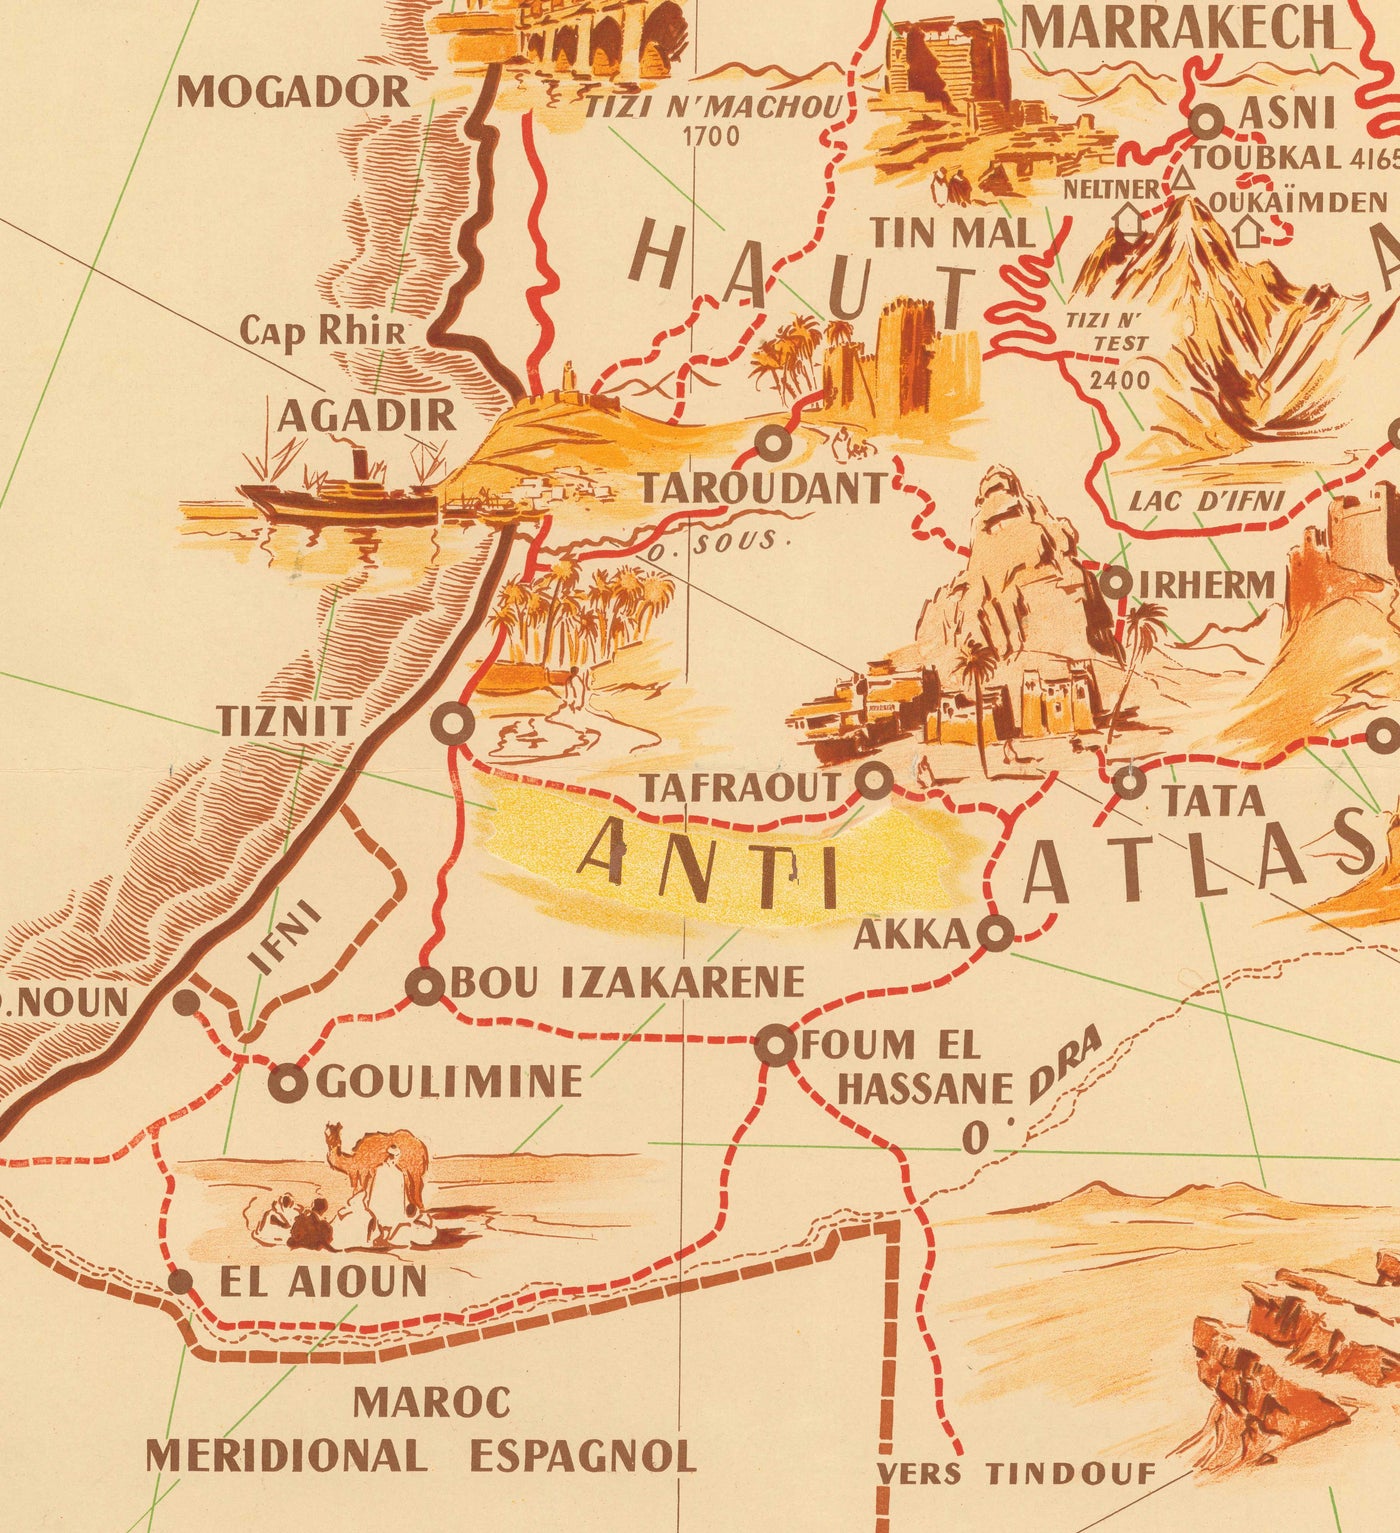 Old Map of Morocco by Theophile-Jean Delaye in 1950 - Casablanca, Rabat, Fes, Marrakesh, Tangier